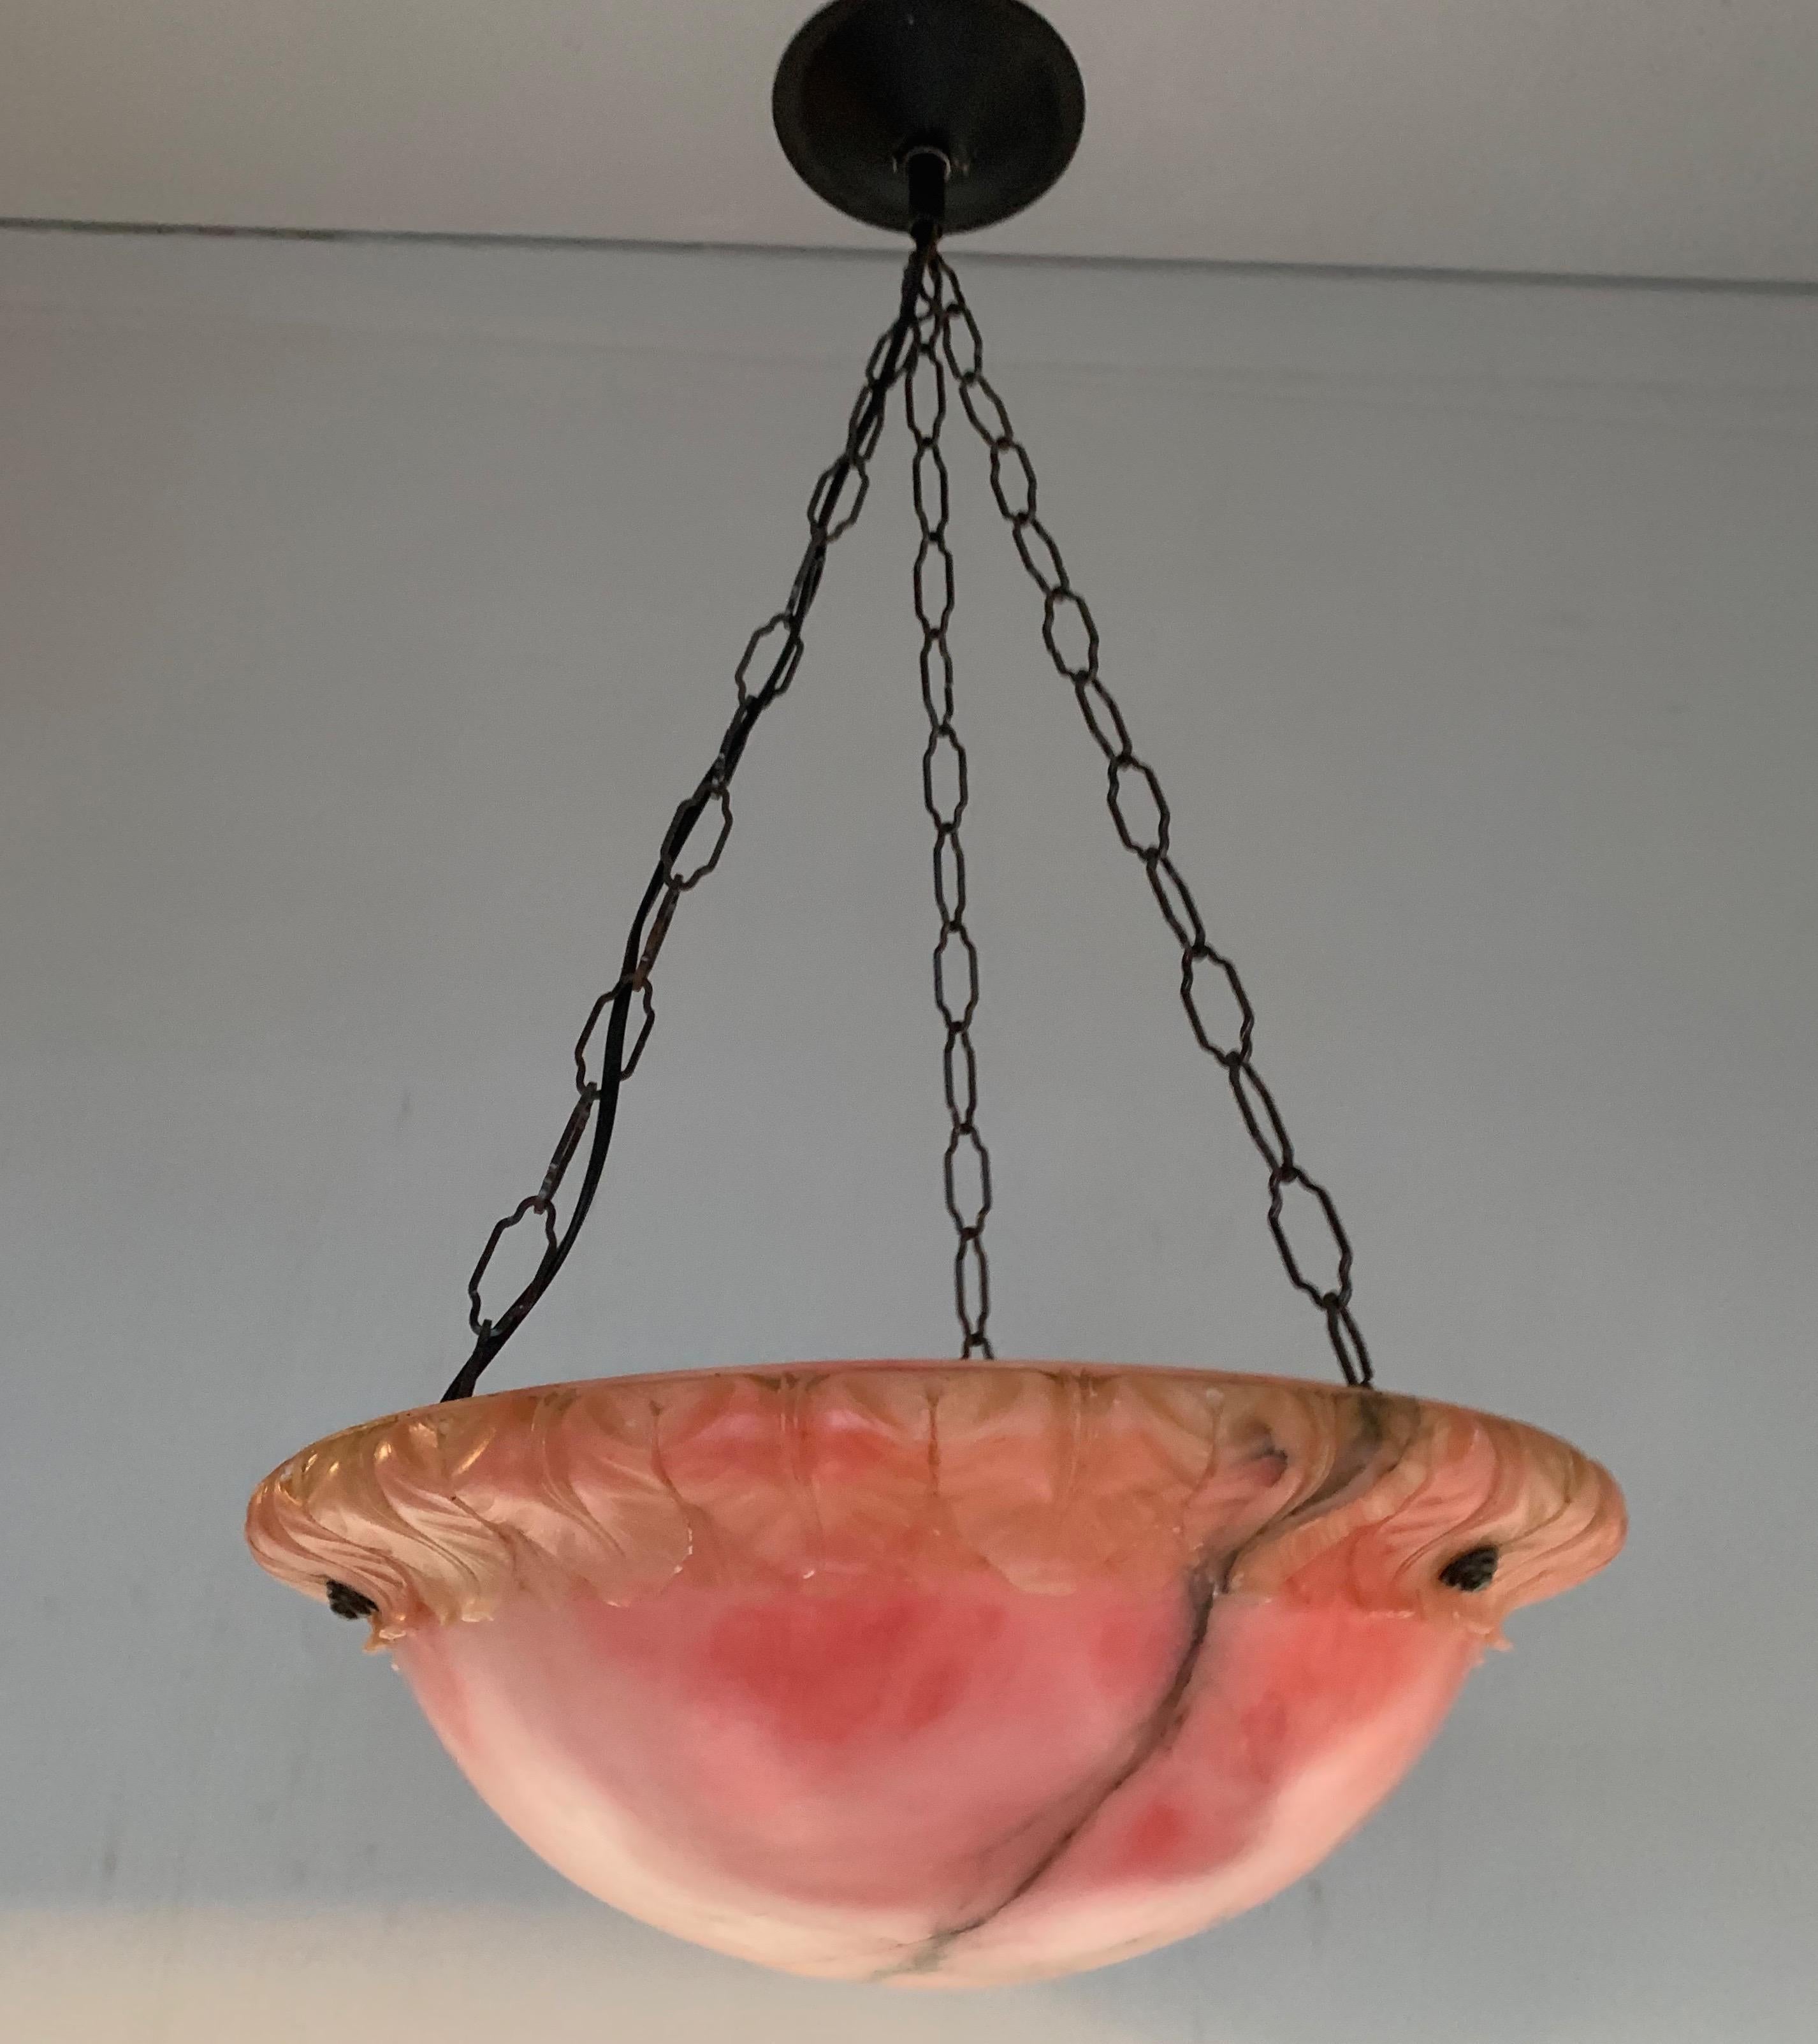 Good size and top quality carved alabaster pendant with black color chain and canopy.

This early 20th century handcrafted pendant comes with a perfect condition alabaster shade. The stylish edge with curved leaf design makes this pendant extra